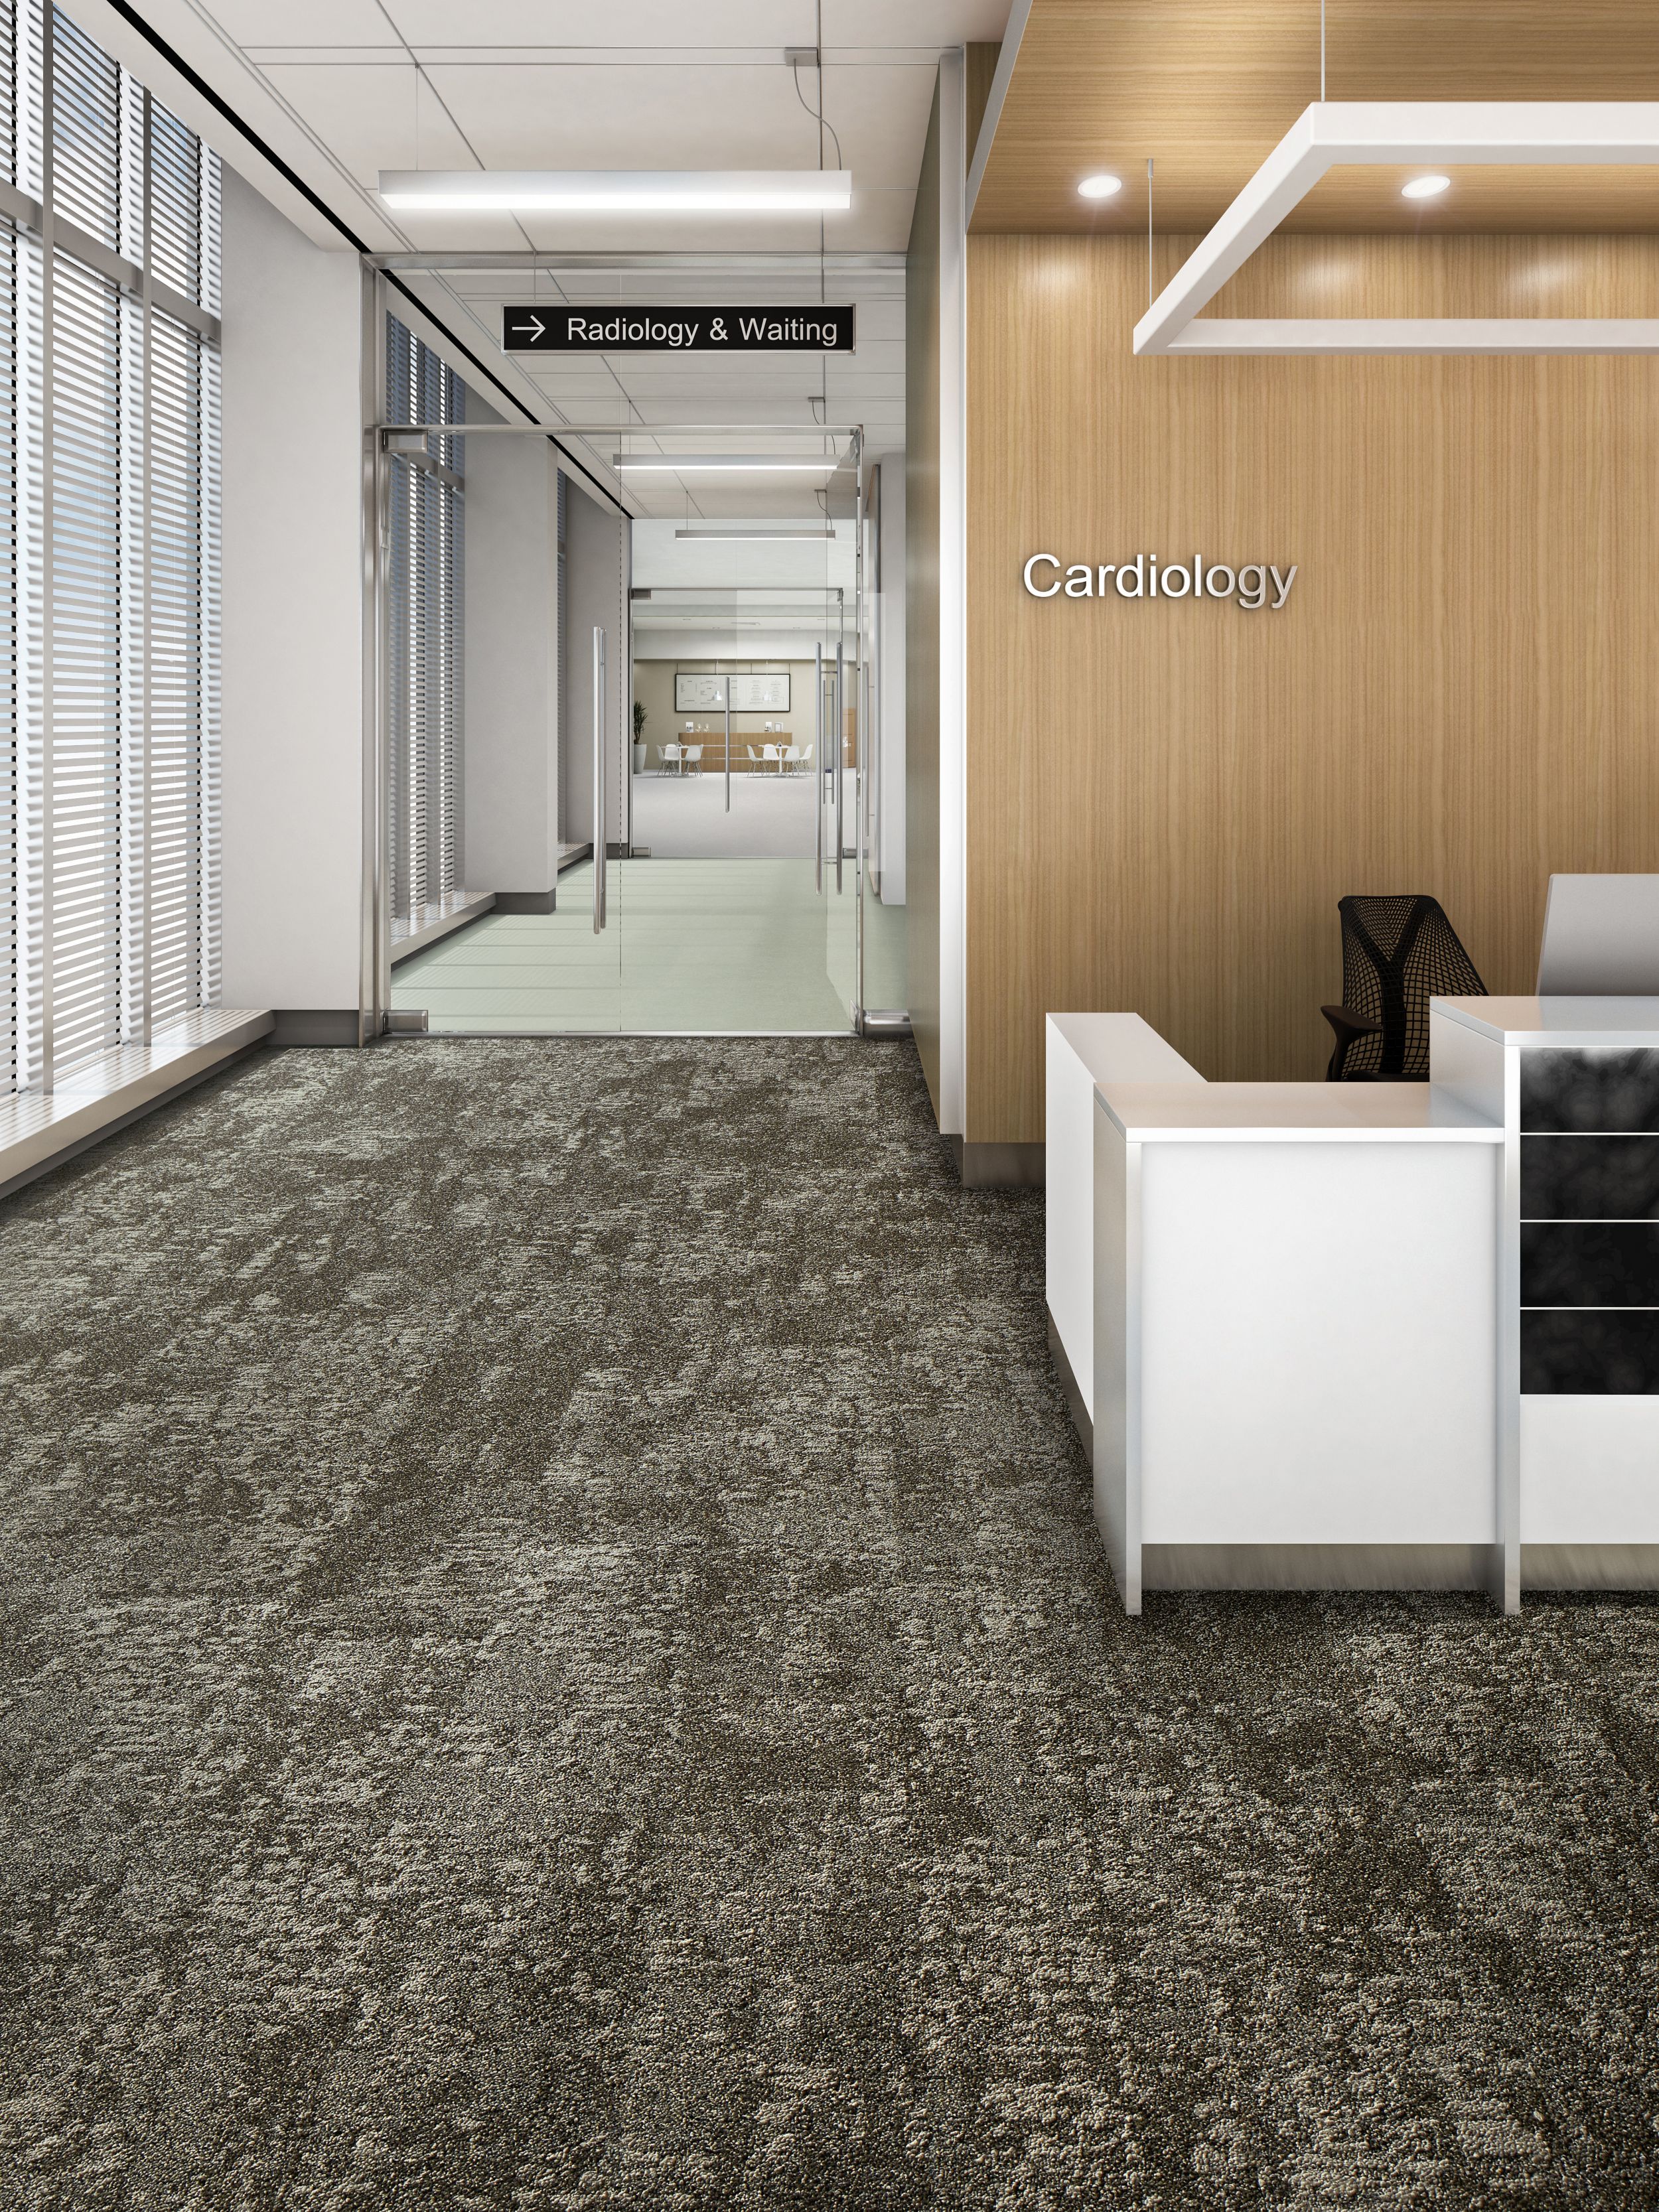 Interface Just Deserts plank carpet tile in lobby area with Plant-astic LVT in corridor imagen número 7